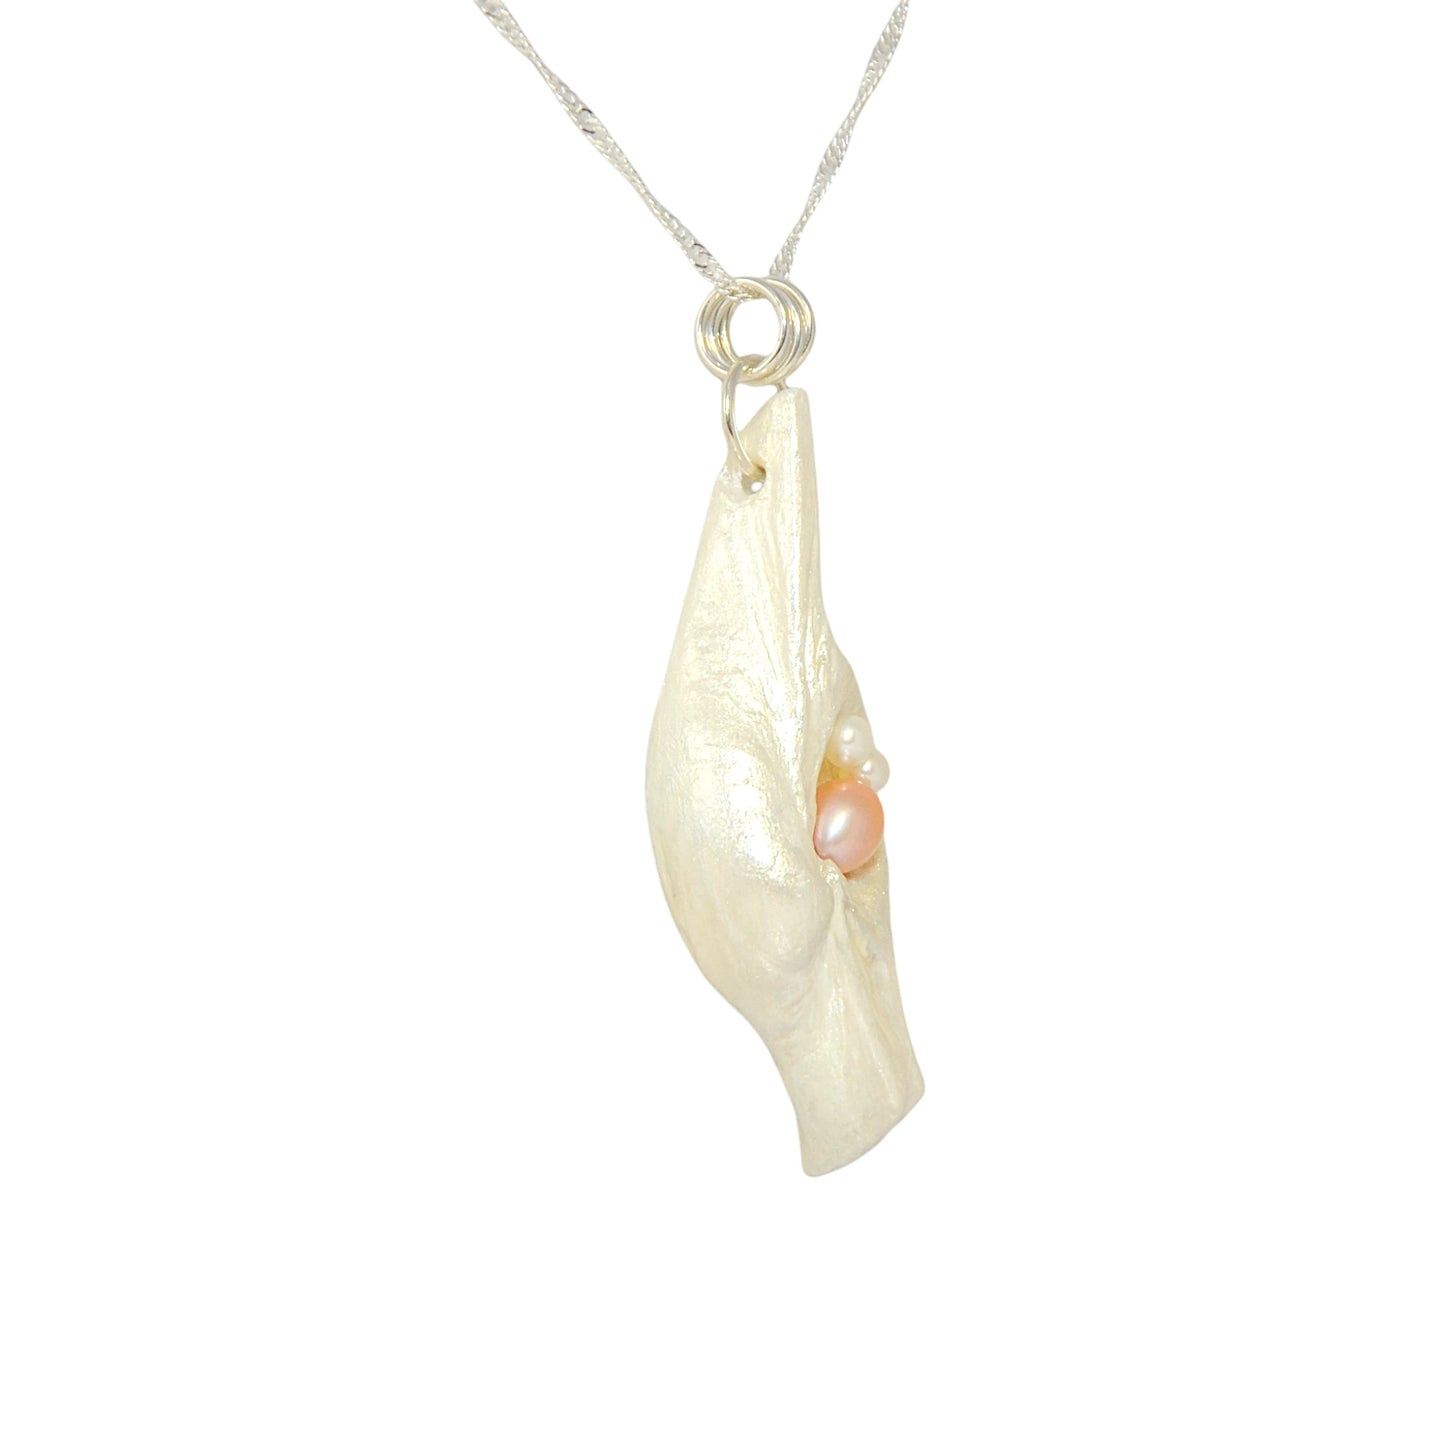 This natural seashell pendant has a real 7-8mm pink freshwater pearl and two baby pearls. The pendant is turned so the viewer can see the right side of the pendant.